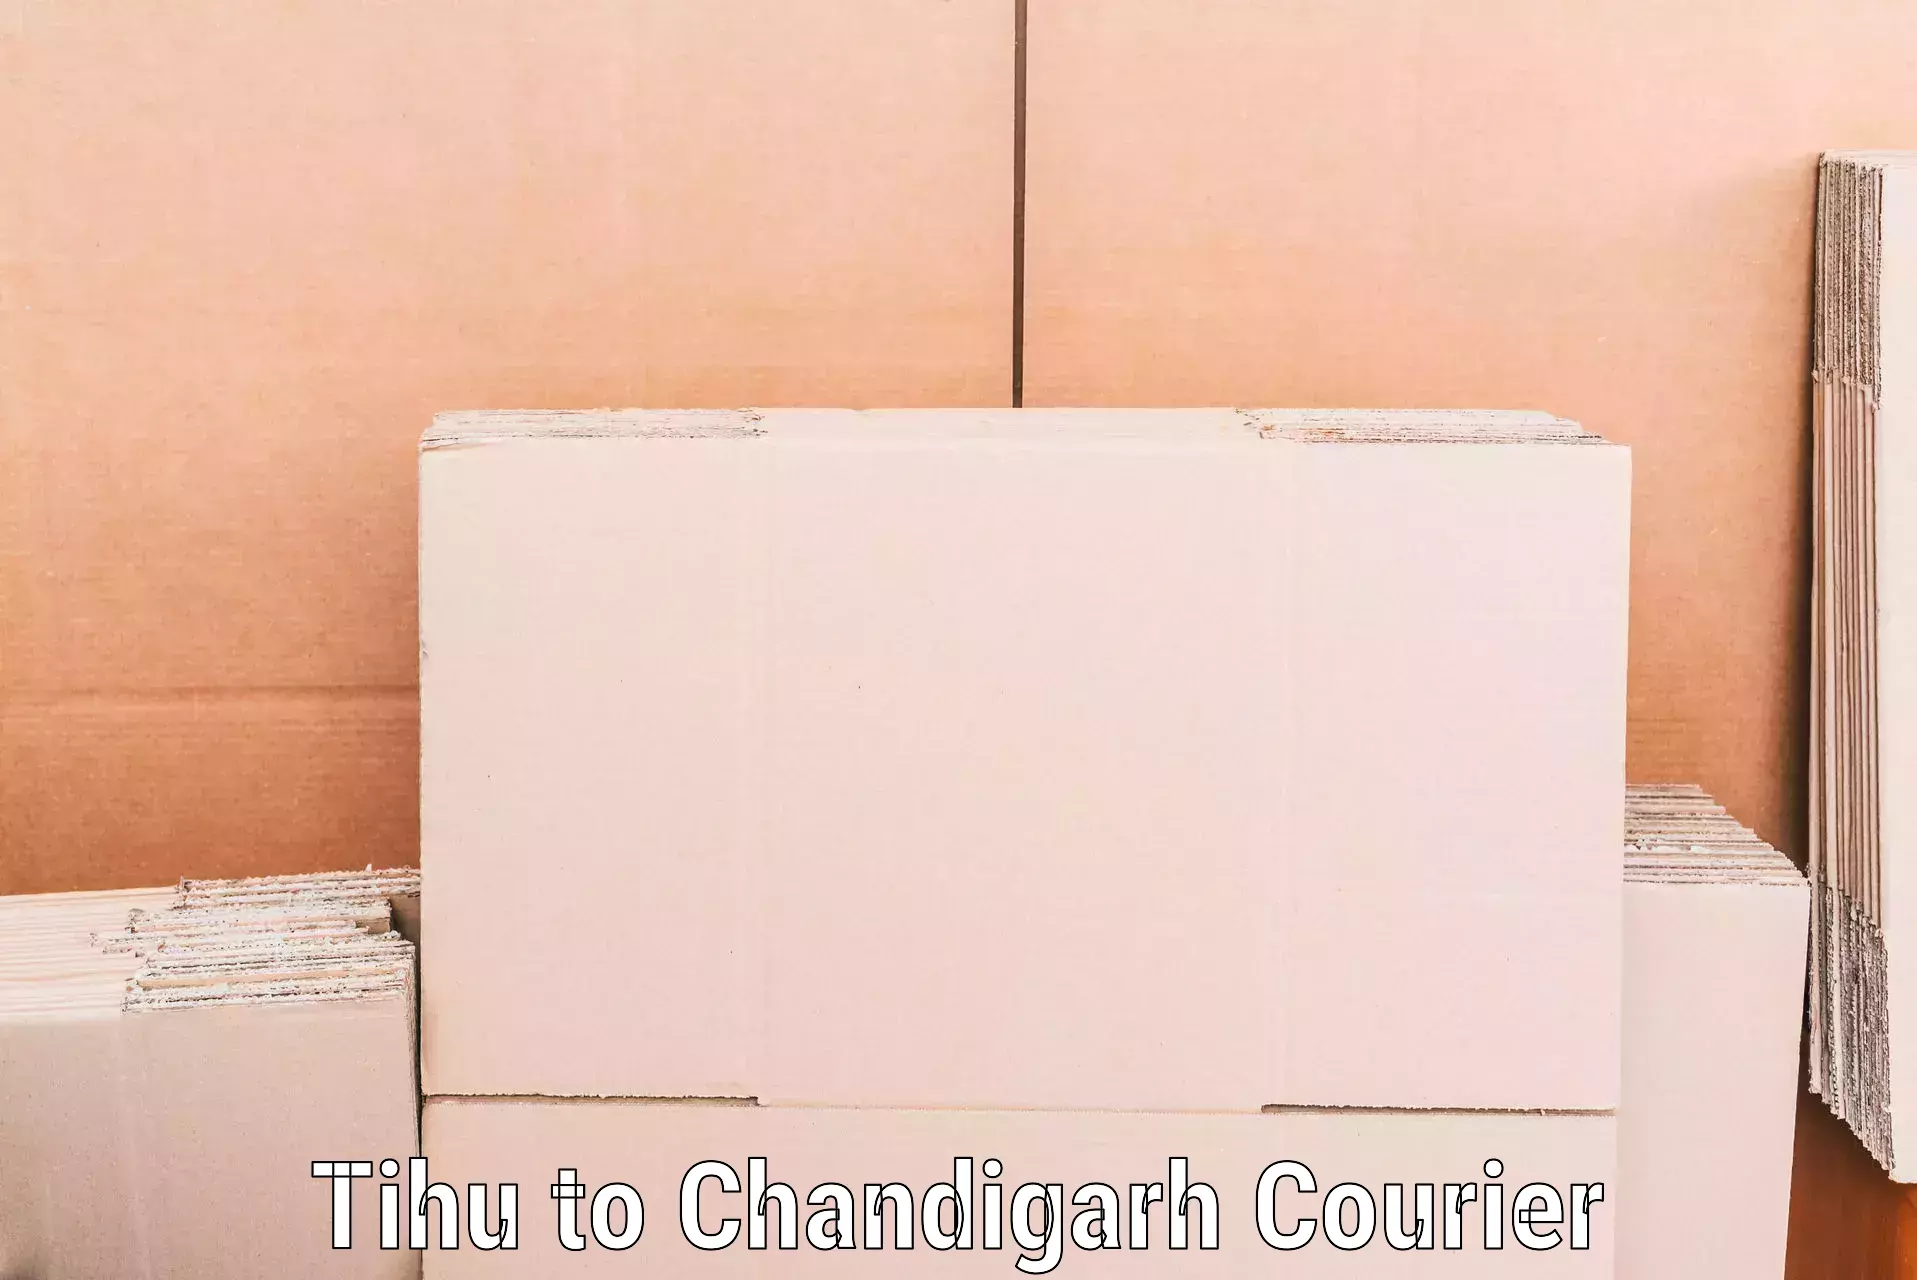 Quality moving and storage in Tihu to Chandigarh